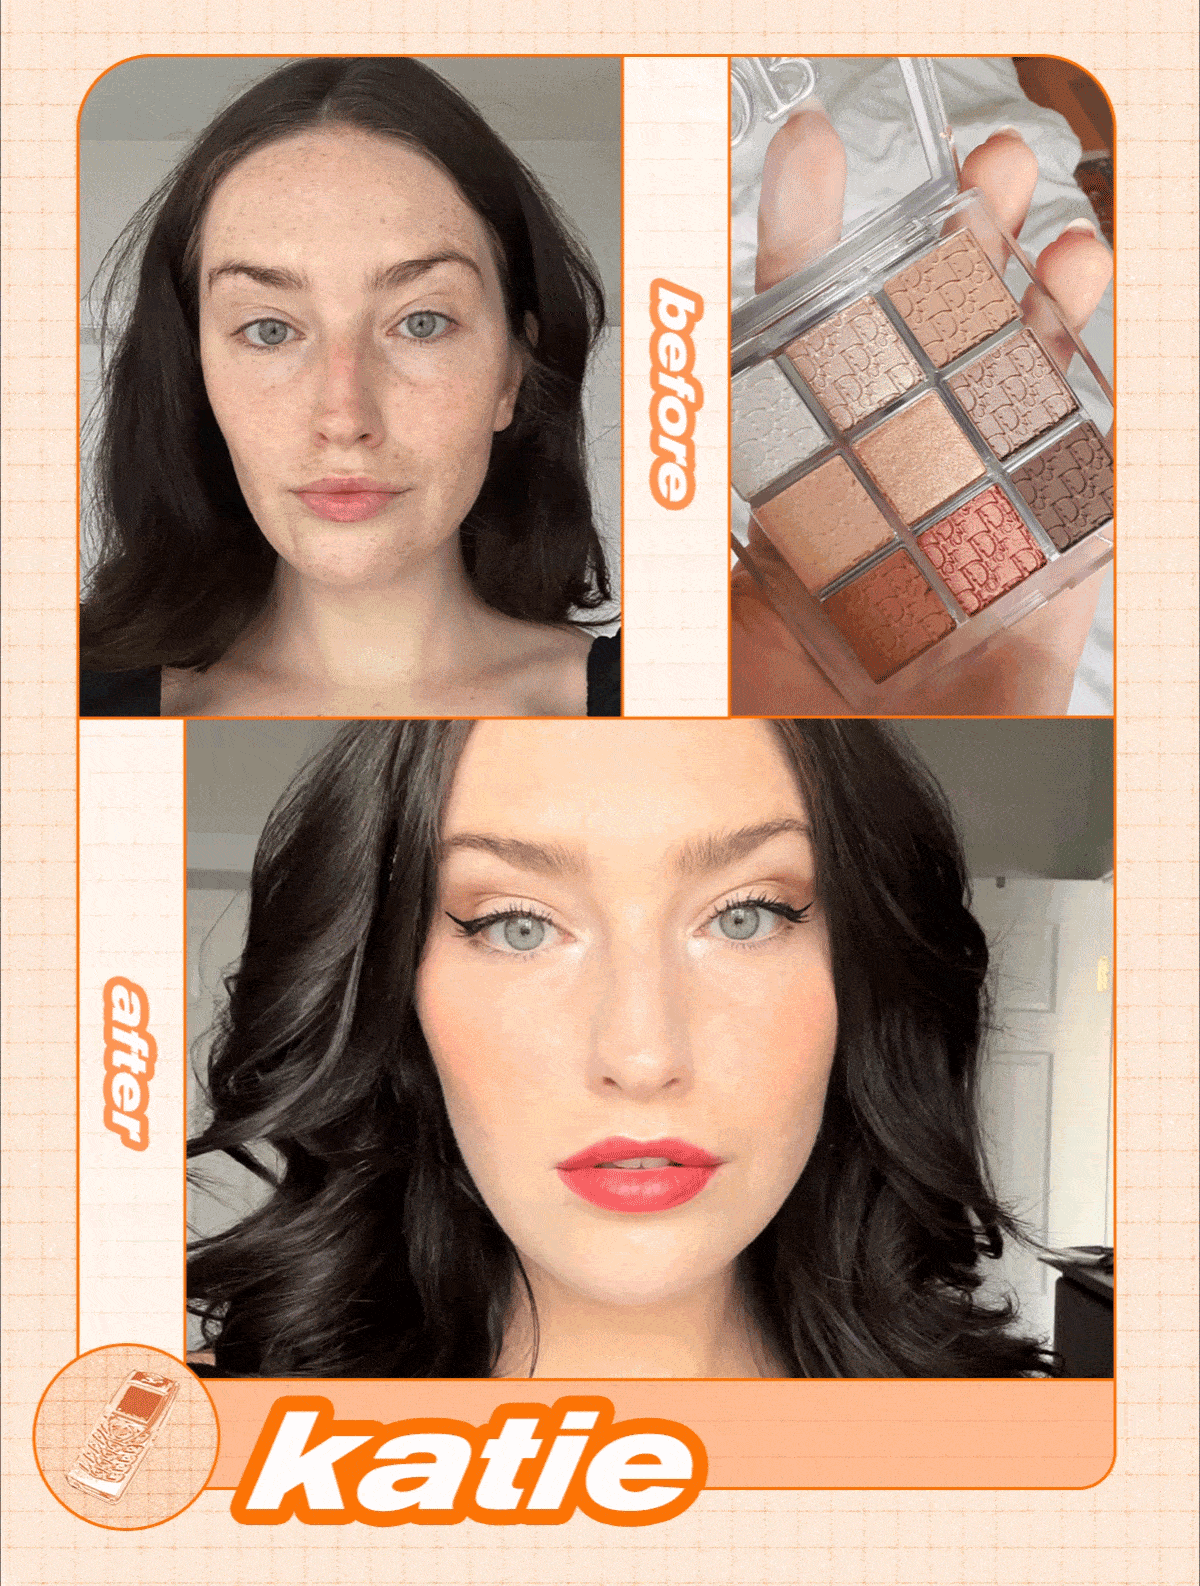 dior-backstage-eyeshadow-palette-review-309199-1693508378539-main